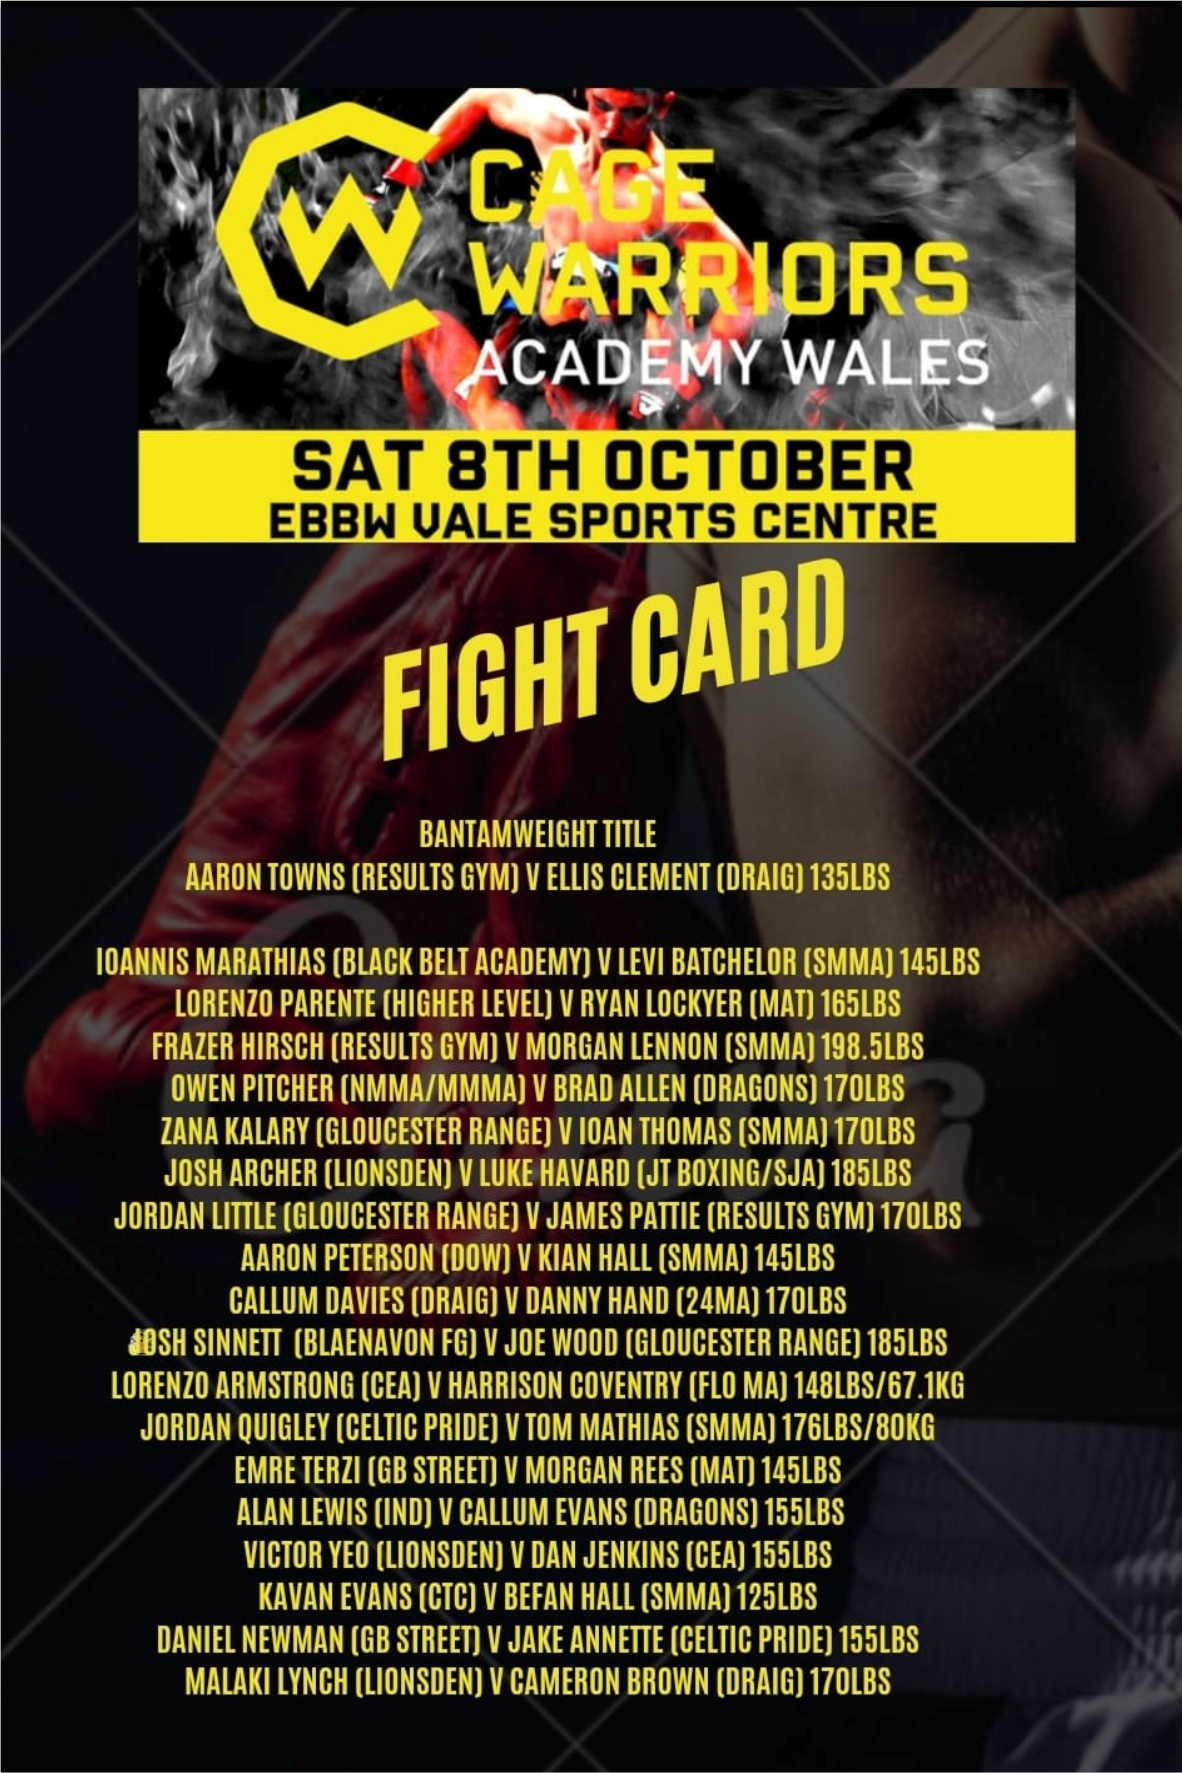 Cage Warriors Academy Wales 8-10-22